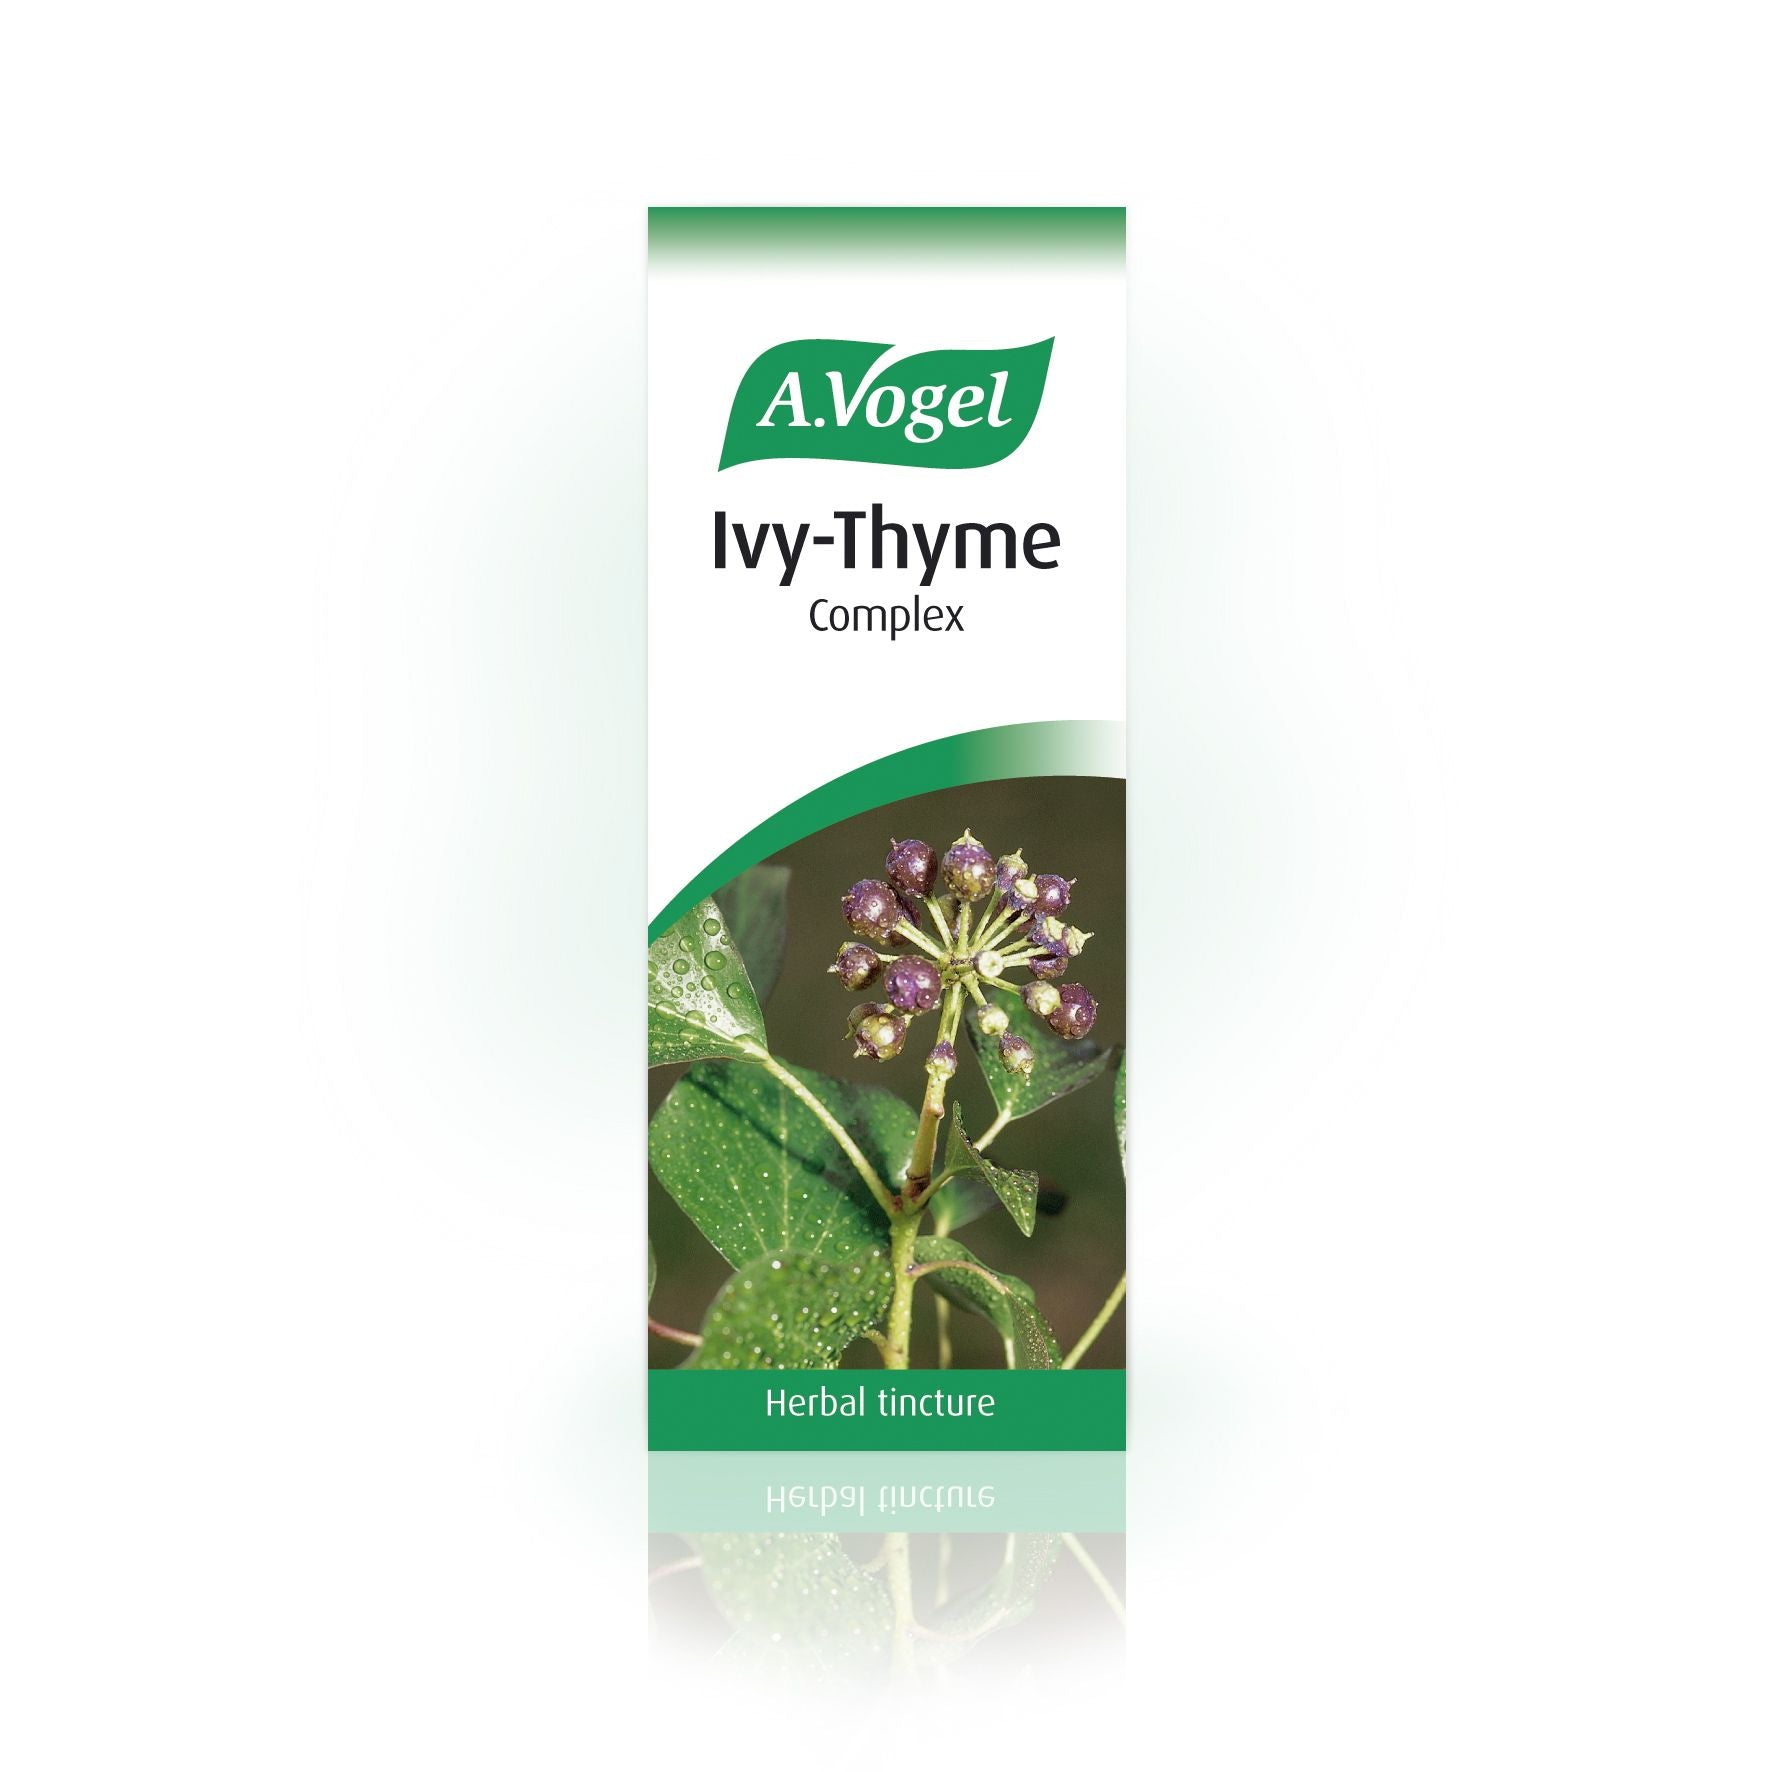 A. Vogel Ivy-Thyme Complex